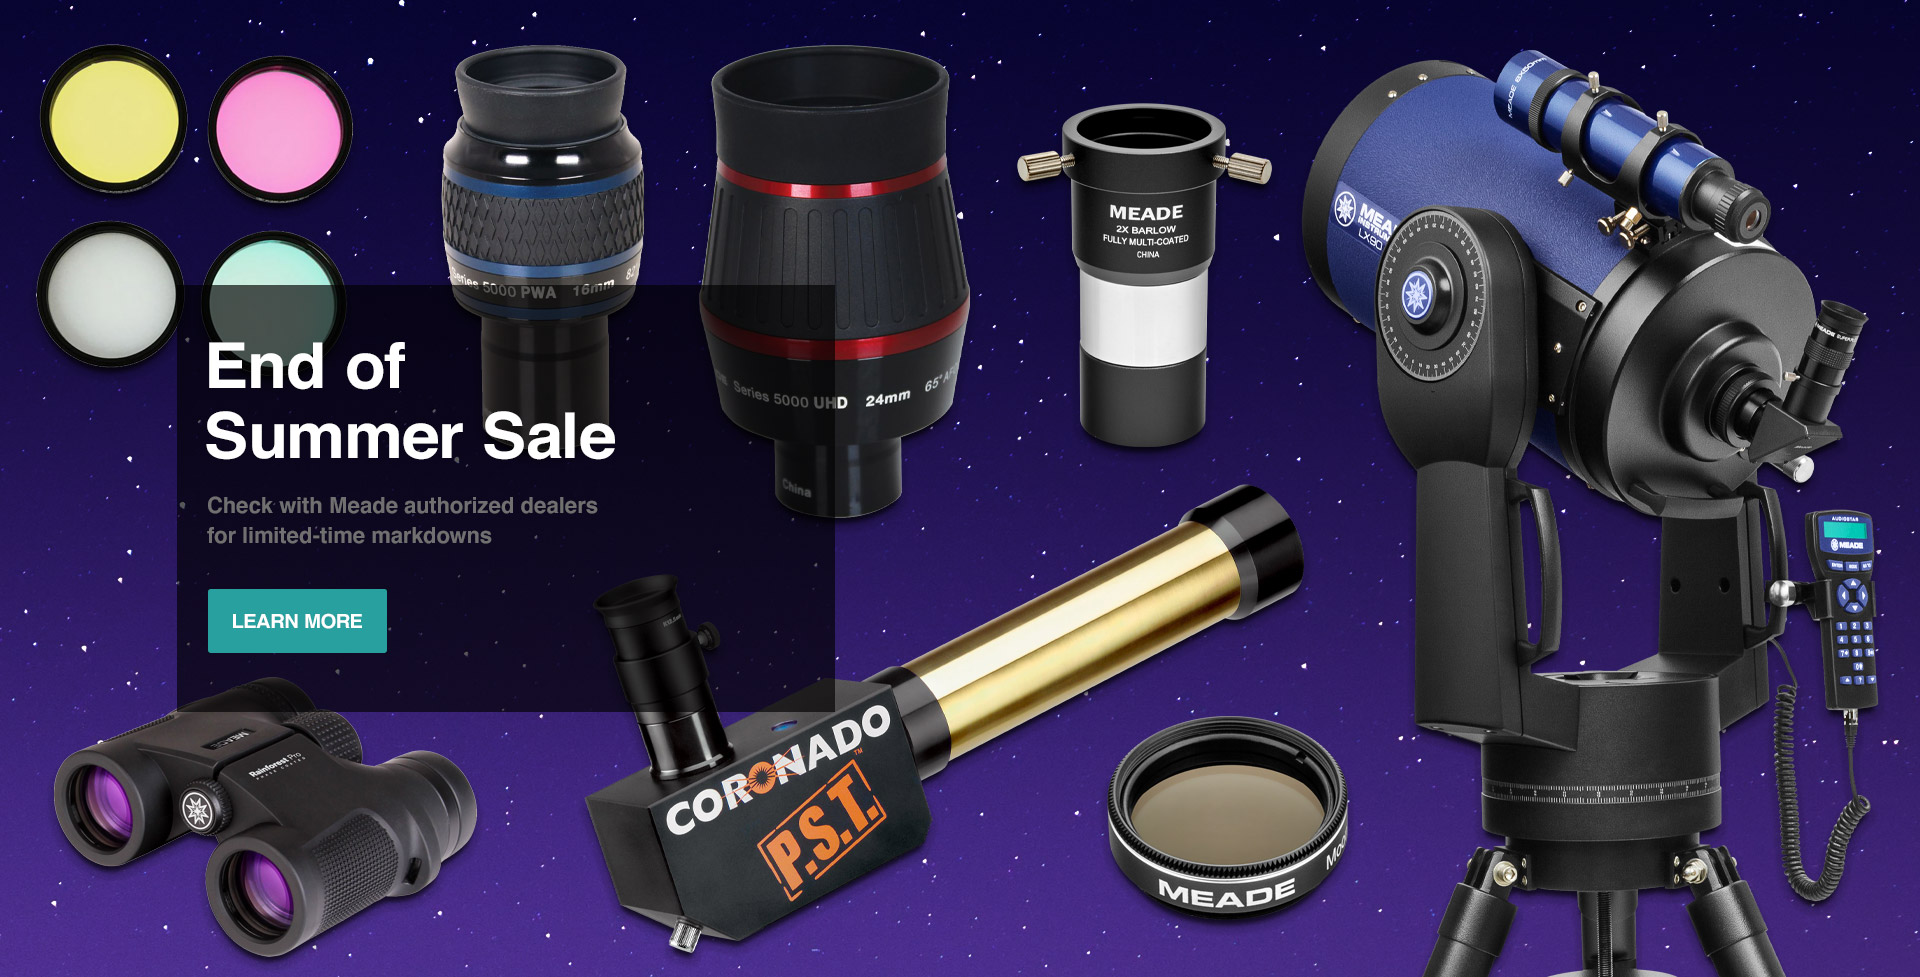 End of Summer Sale: Check with Meade Authorized Dealers for Limited-Time Markdowns